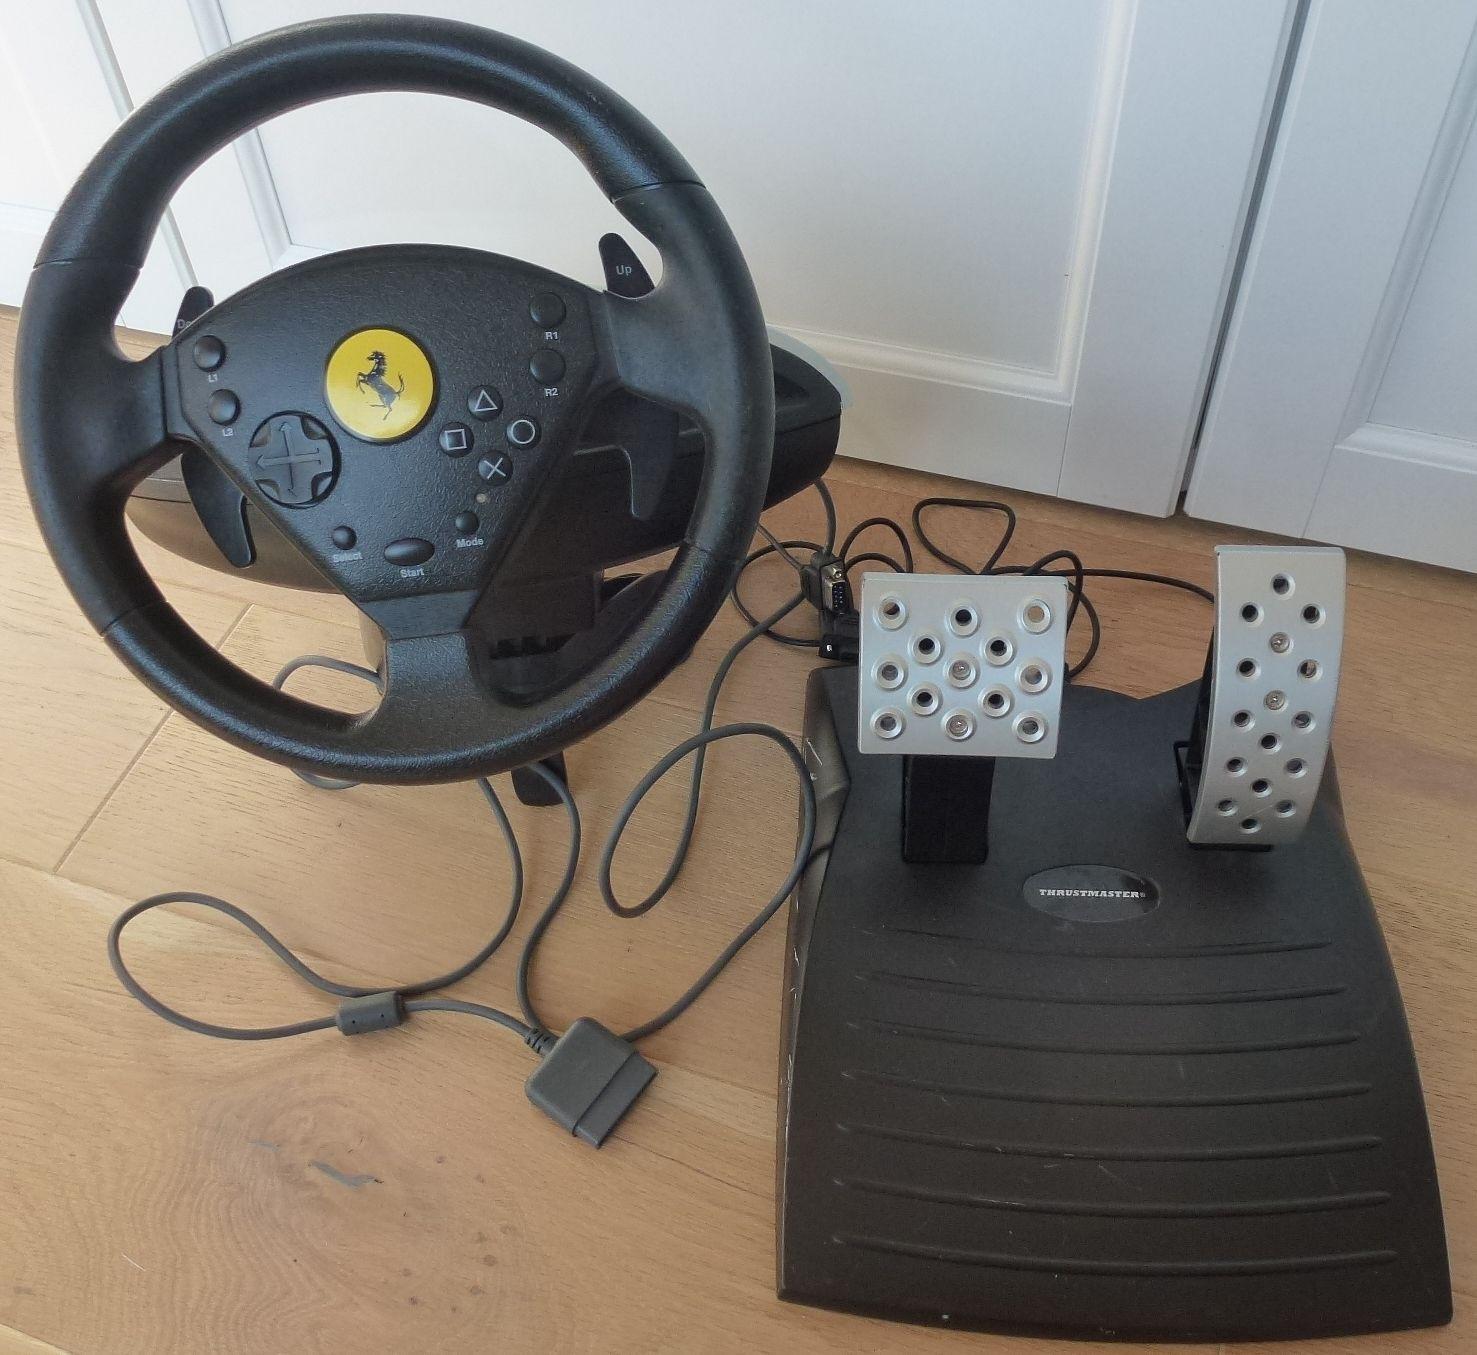 Thrustmaster Ferrari Challenge Racing Wheel - Ensemble volant et pédales -  filaire - pour Sony PlayStation 2, PS one, Sony PlayStation